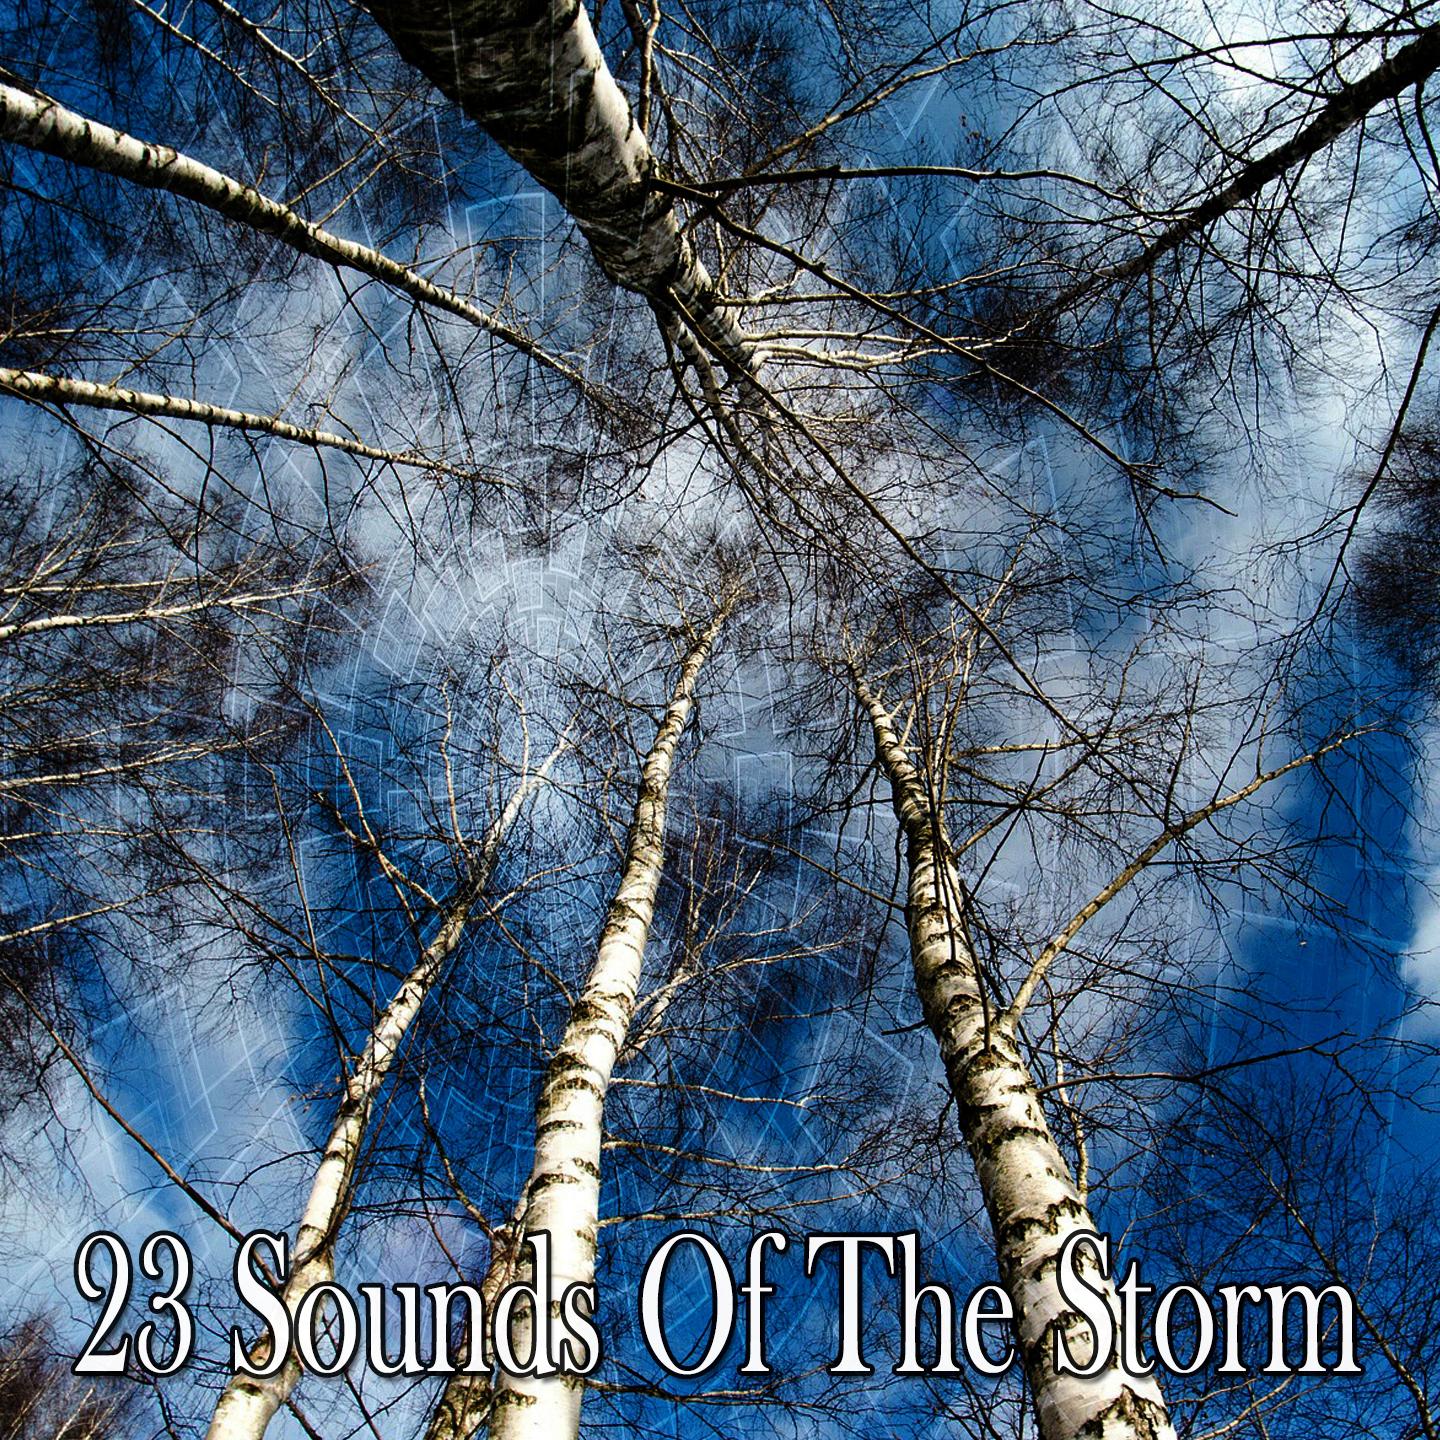 23 Sounds of the Storm